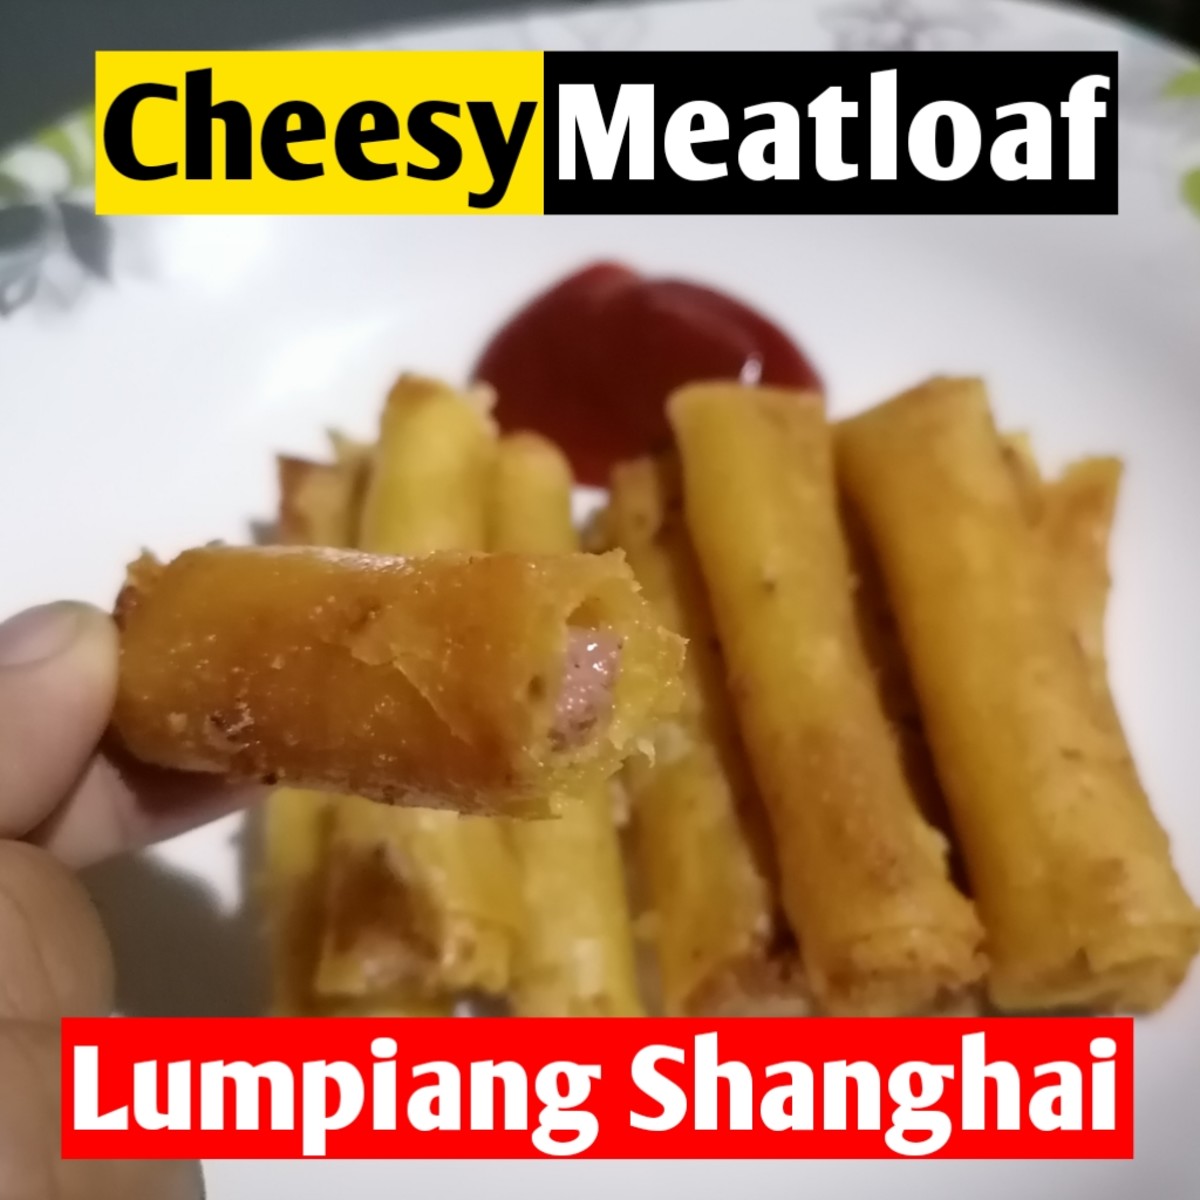 Learn how to make cheesy meatloaf lumpiang Shanghai